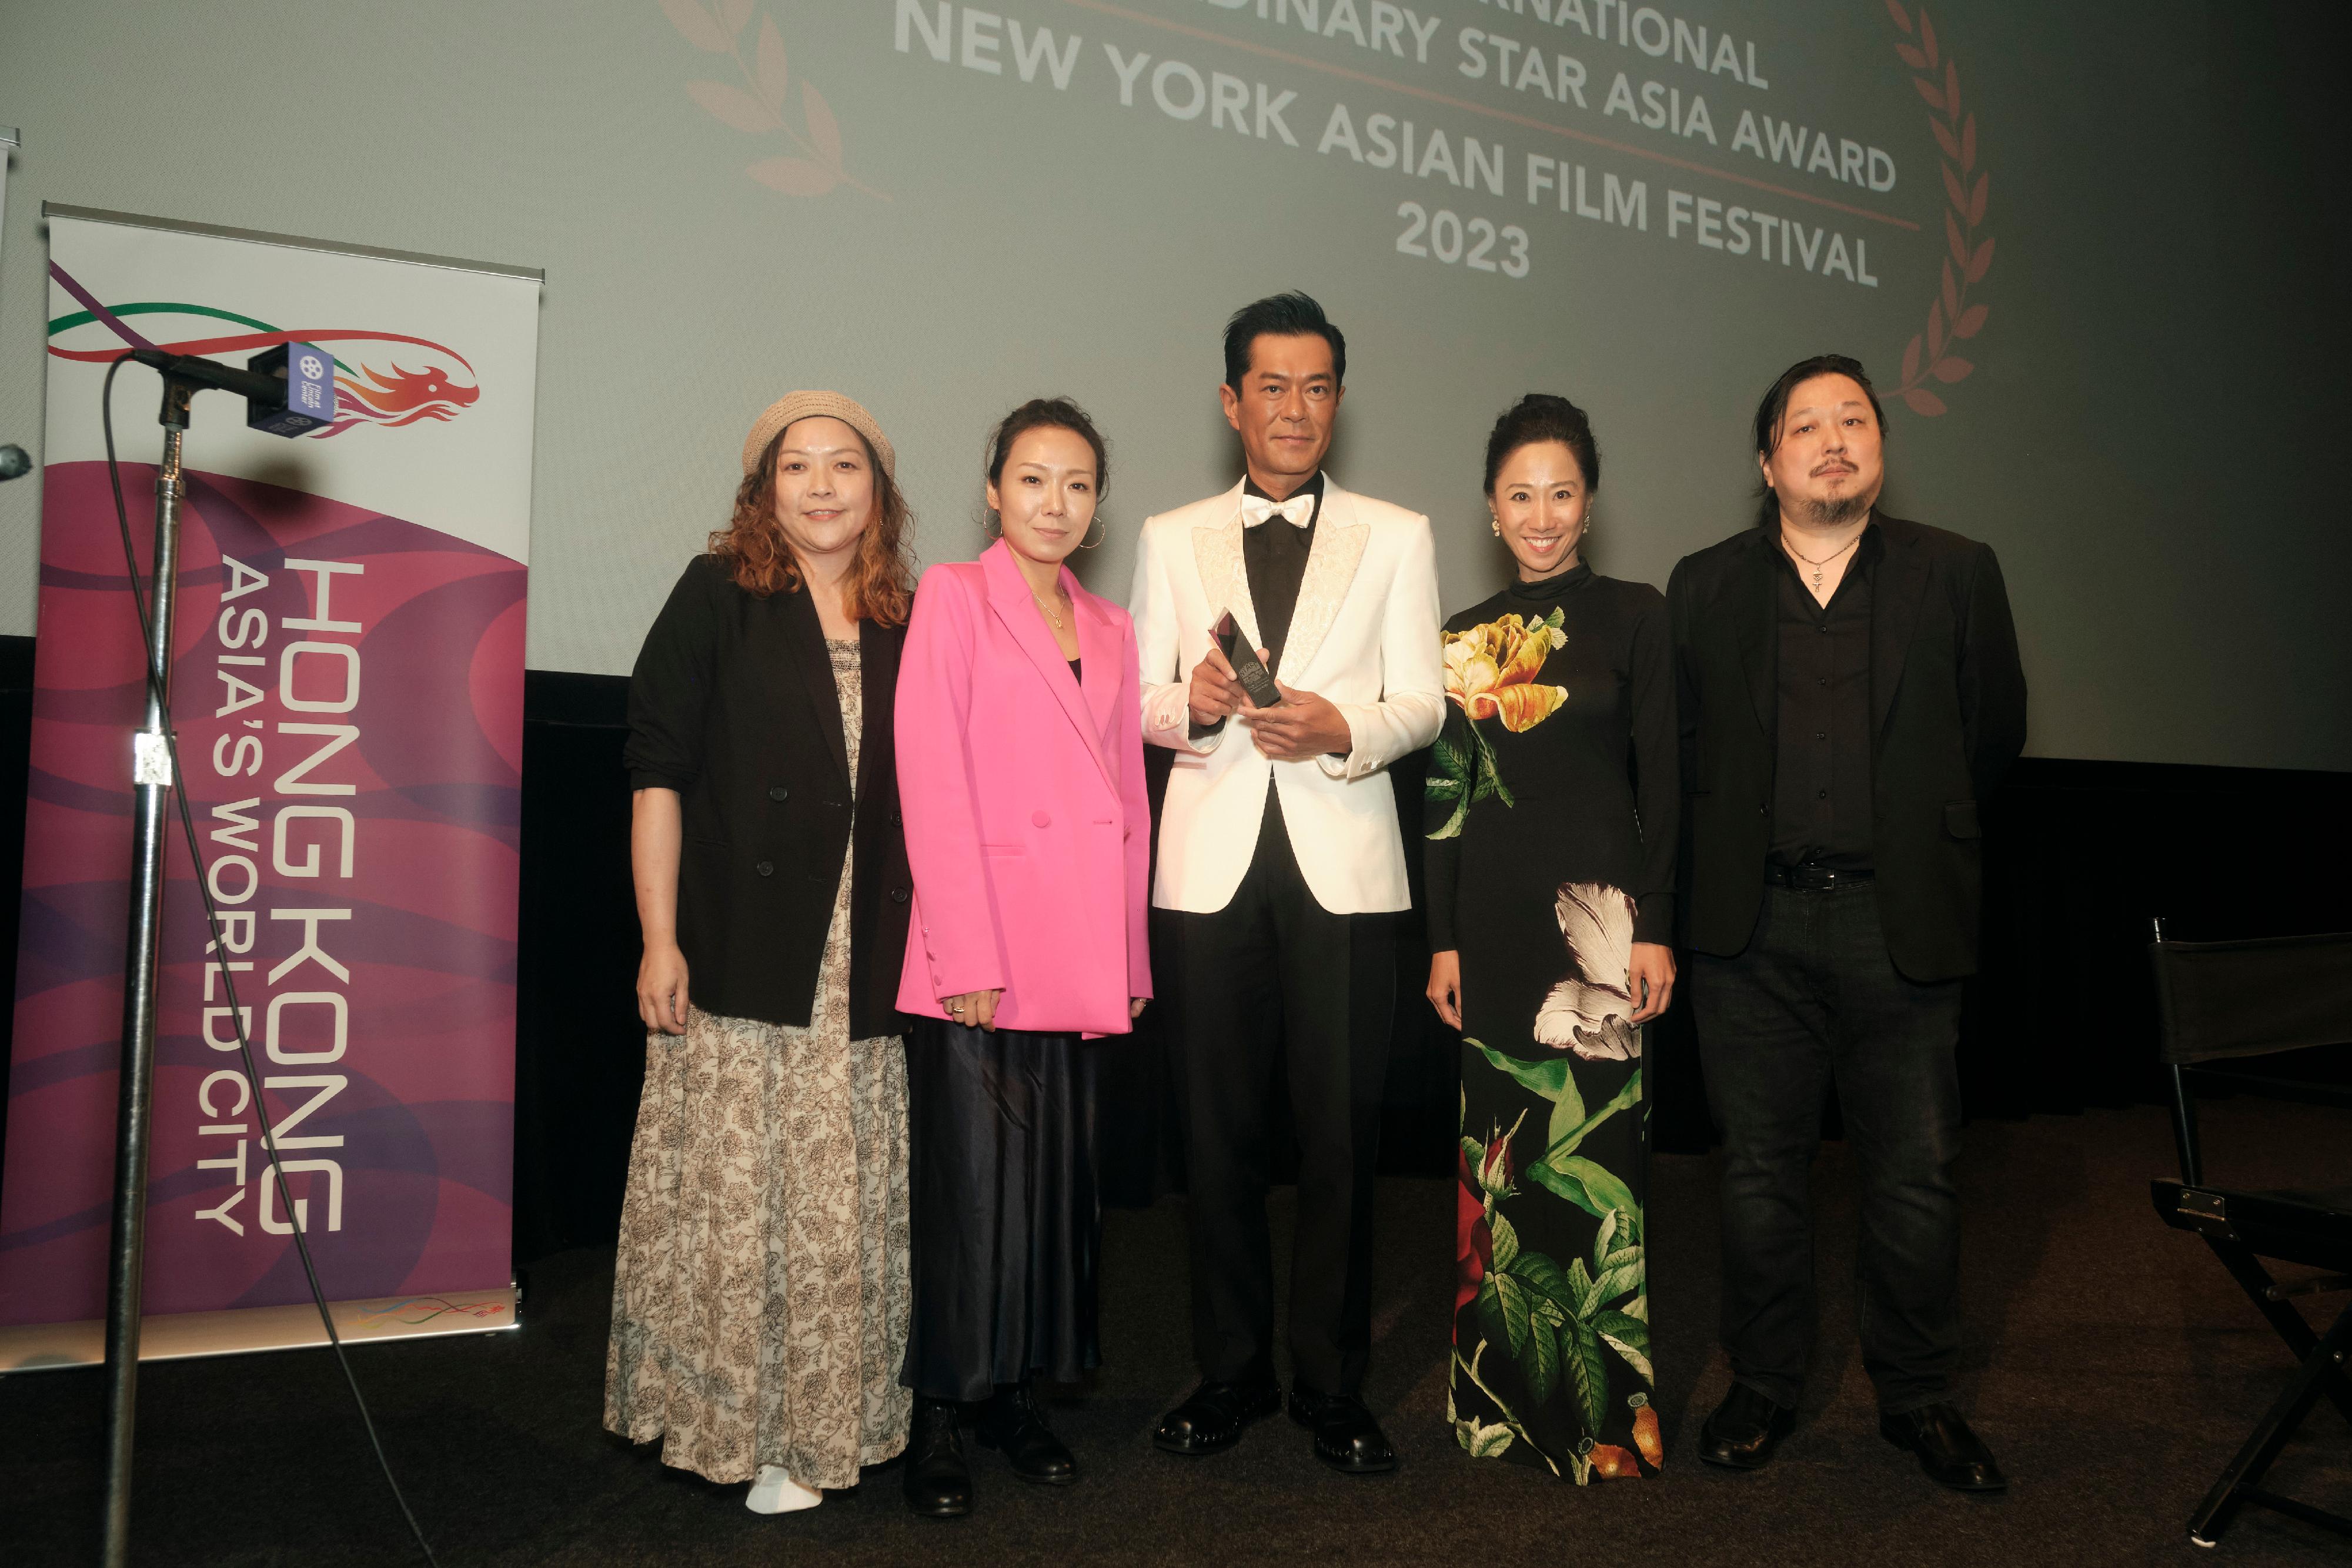 Hong Kong megastar Louis Koo was presented with the Extraordinary Star Asia Award for Exceptional Contribution to Asian Cinema presented by the New York Asian Film Festival (NYAFF) on July 19 (New York time) in recognition of his remarkable achievements in the creative industry in Hong Kong and Asia. Pictured at the award presentation ceremony are the Director of the Hong Kong Economic and Trade Office in New York, Ms Candy Nip (second right); Koo (centre); the Executive Director of the NYAFF, Mr Samuel Jamier (first right); Director of the film "Vital Signs" Cheuk Wan-chi (second left); and producer of "Vital Signs" Jacqueline Liu (first left).